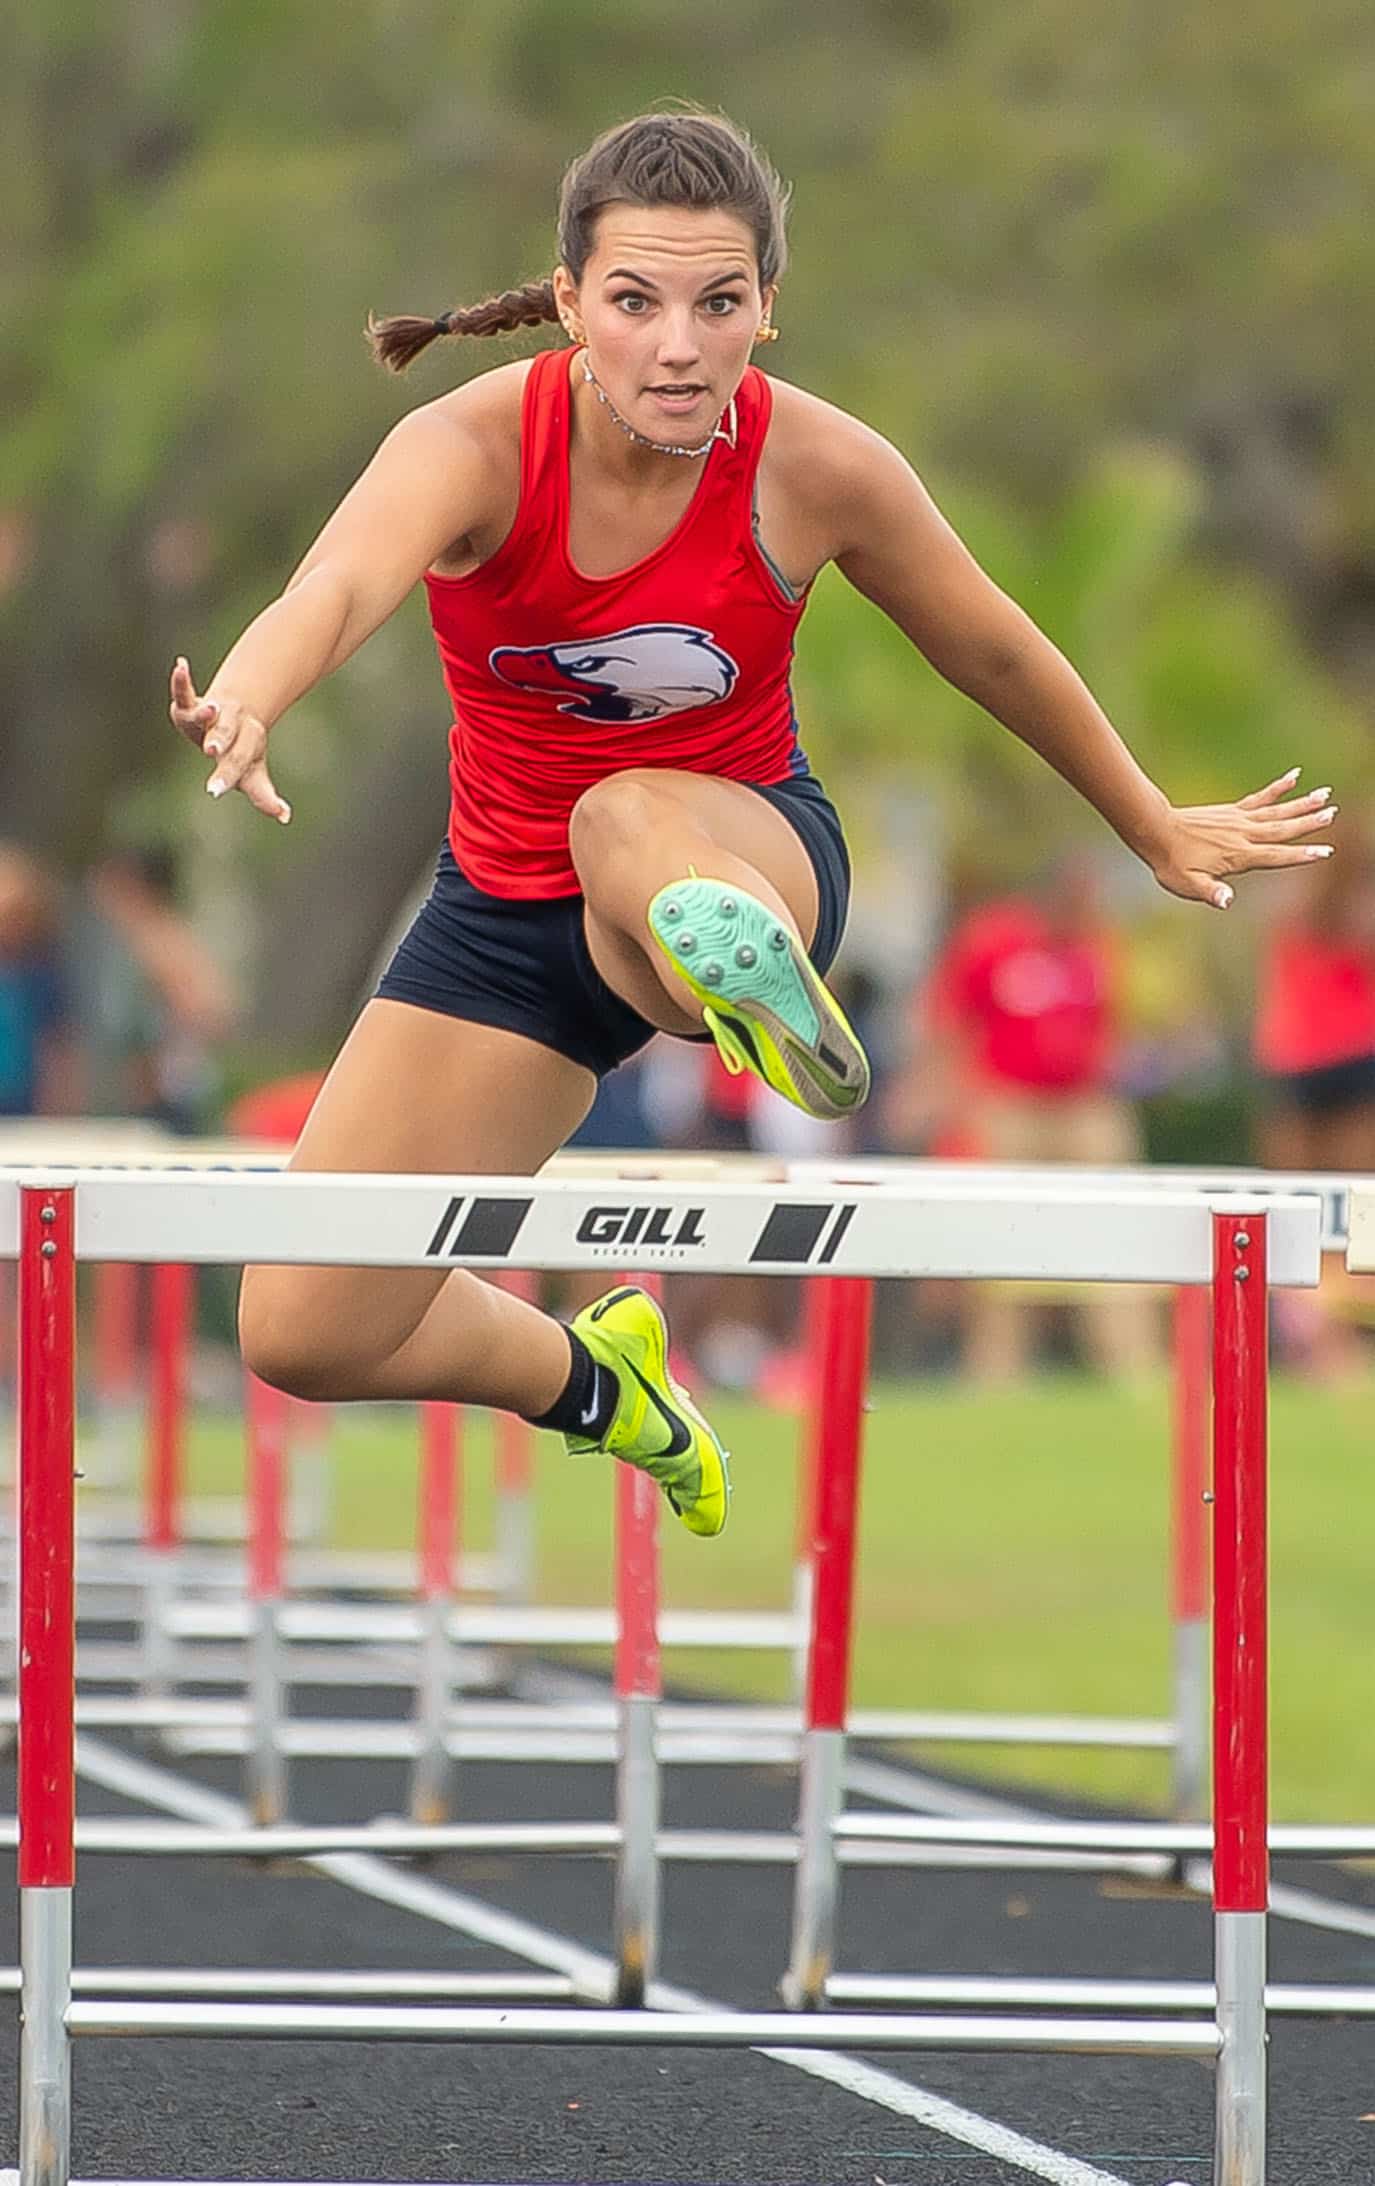 Springstead Hurdler, Victoria Enriquez finished third in the 100 meter event Wednesday at the Springstead Eagle Twilight Track Meet . Photo by JOE DiCRISTOFALO